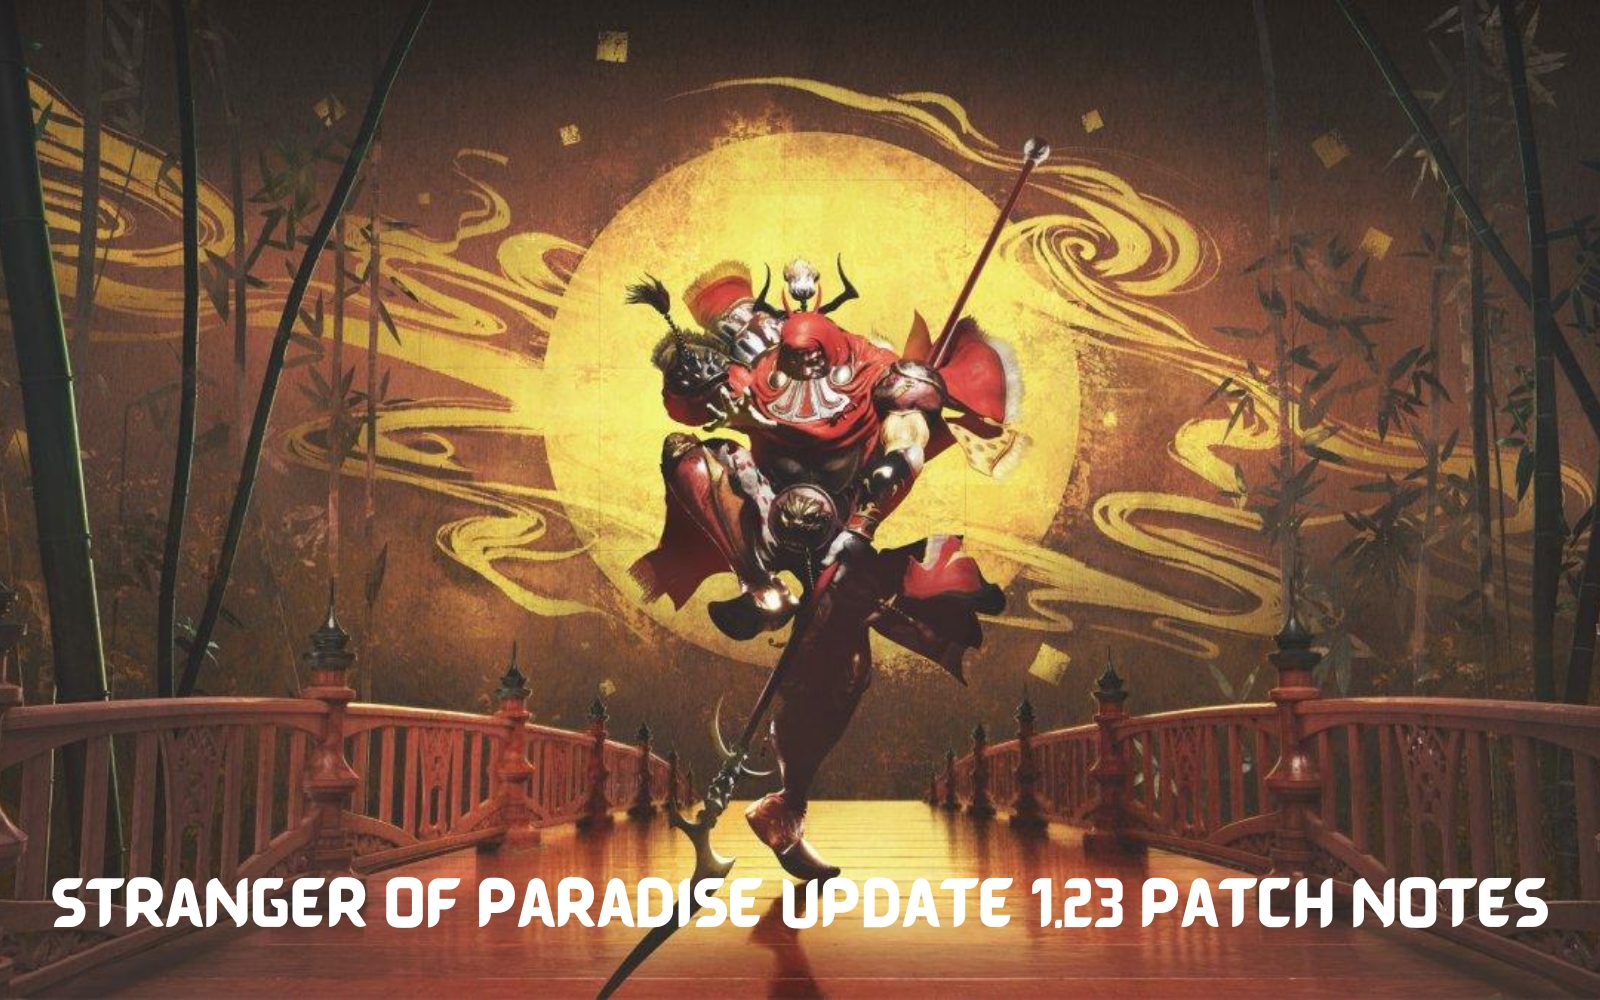 Stranger of Paradise Update 1.23 Patch Notes